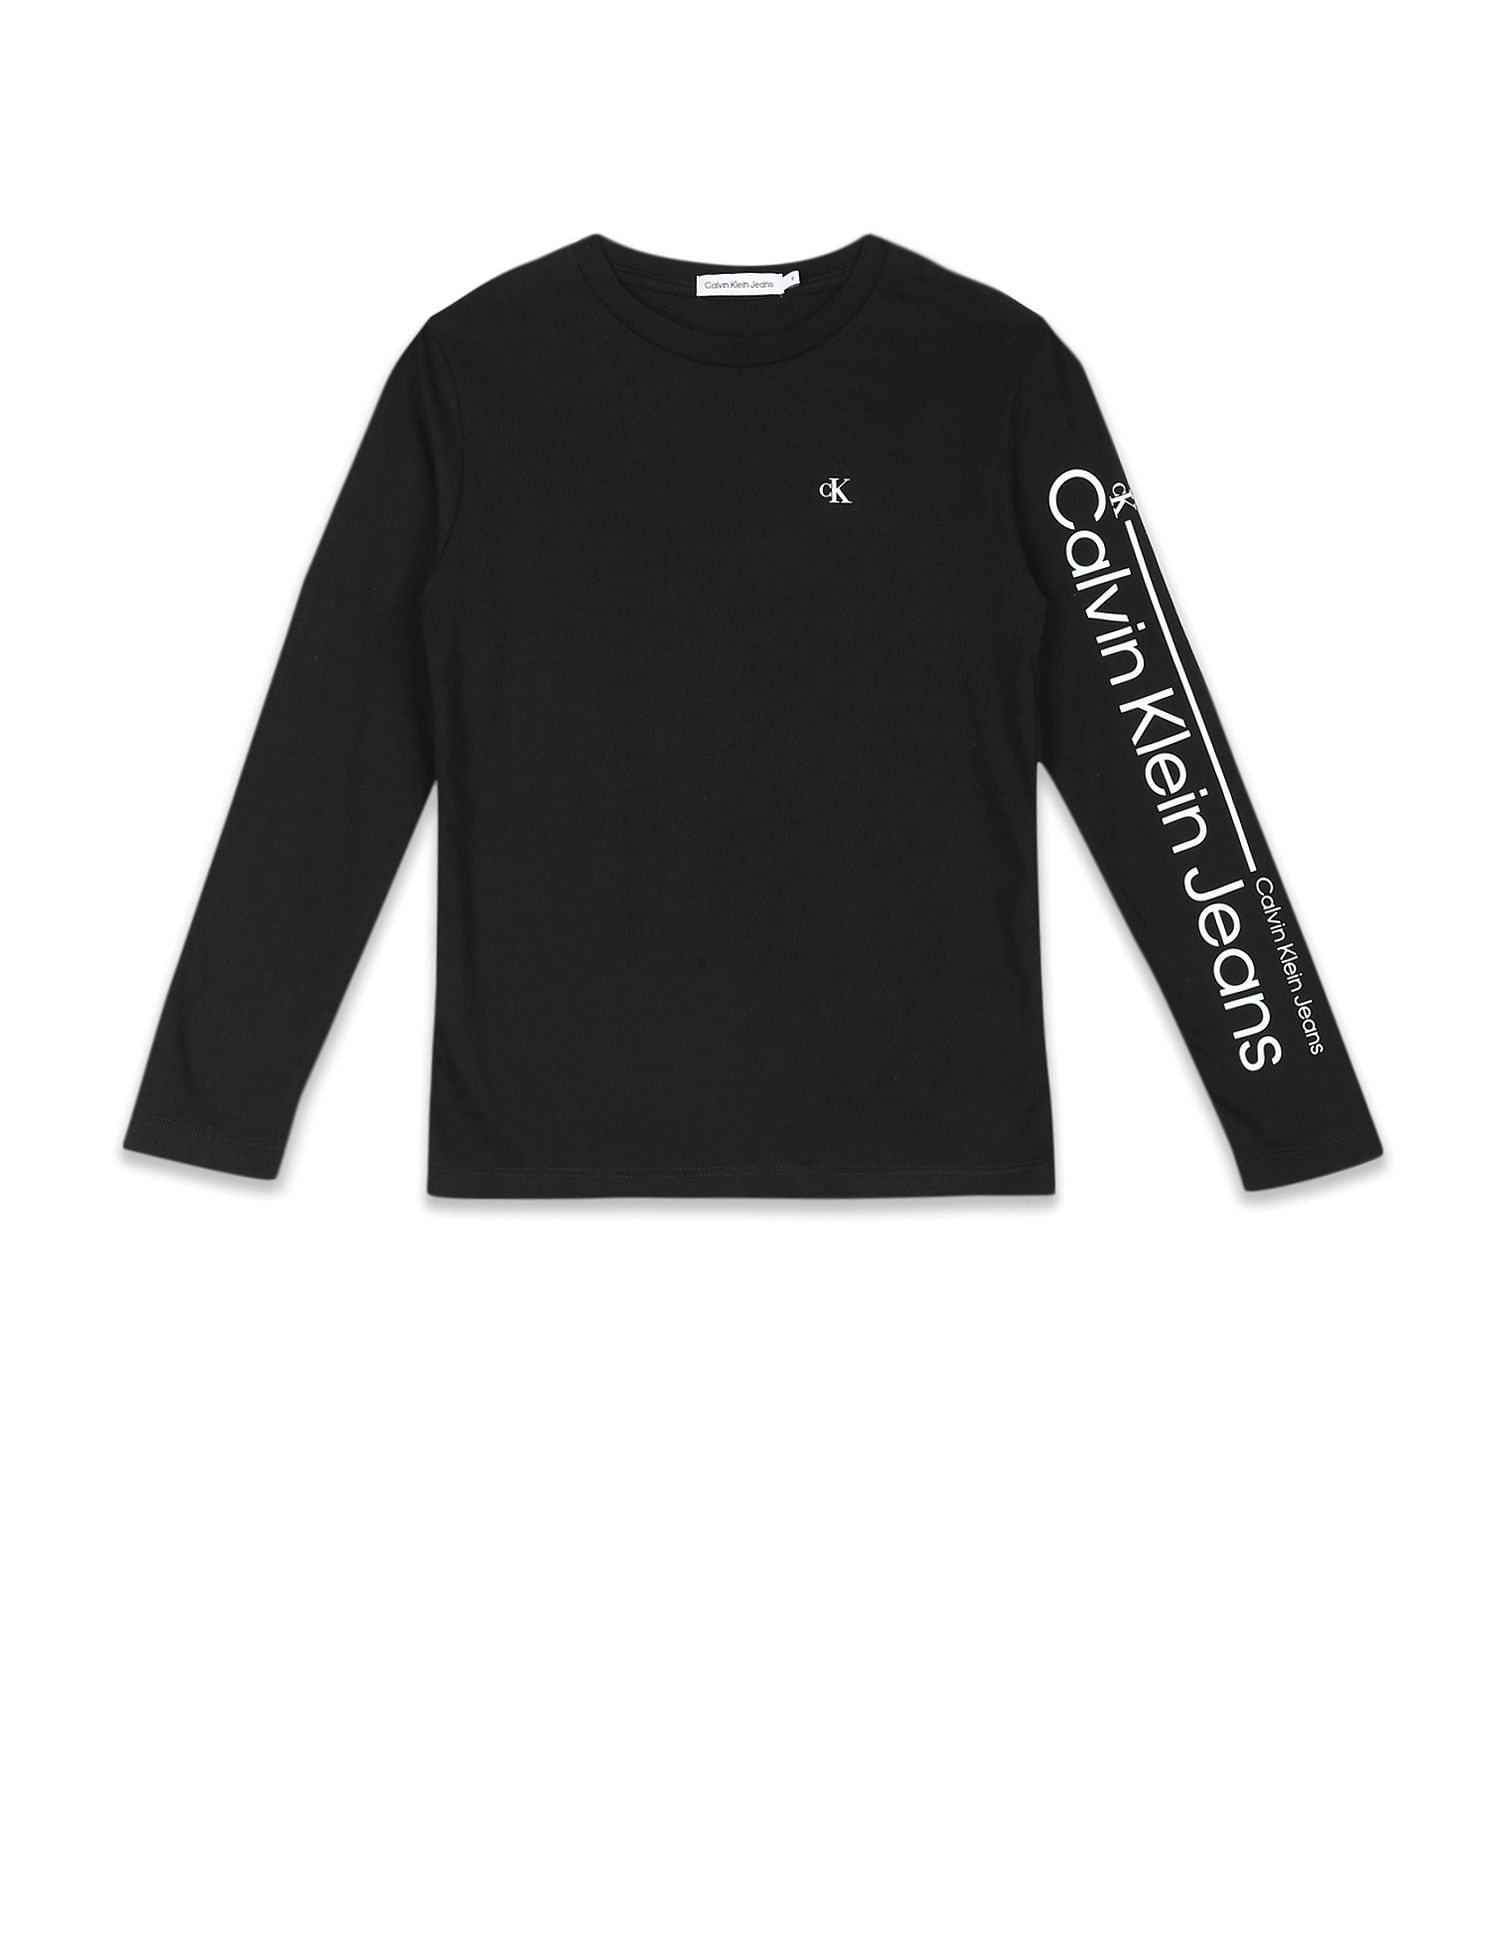 Calvin Klein Jeans MONOGRAM LOGO T-SHIRT Black - Free delivery  Spartoo  NET ! - Clothing short-sleeved t-shirts Child USD/$34.40